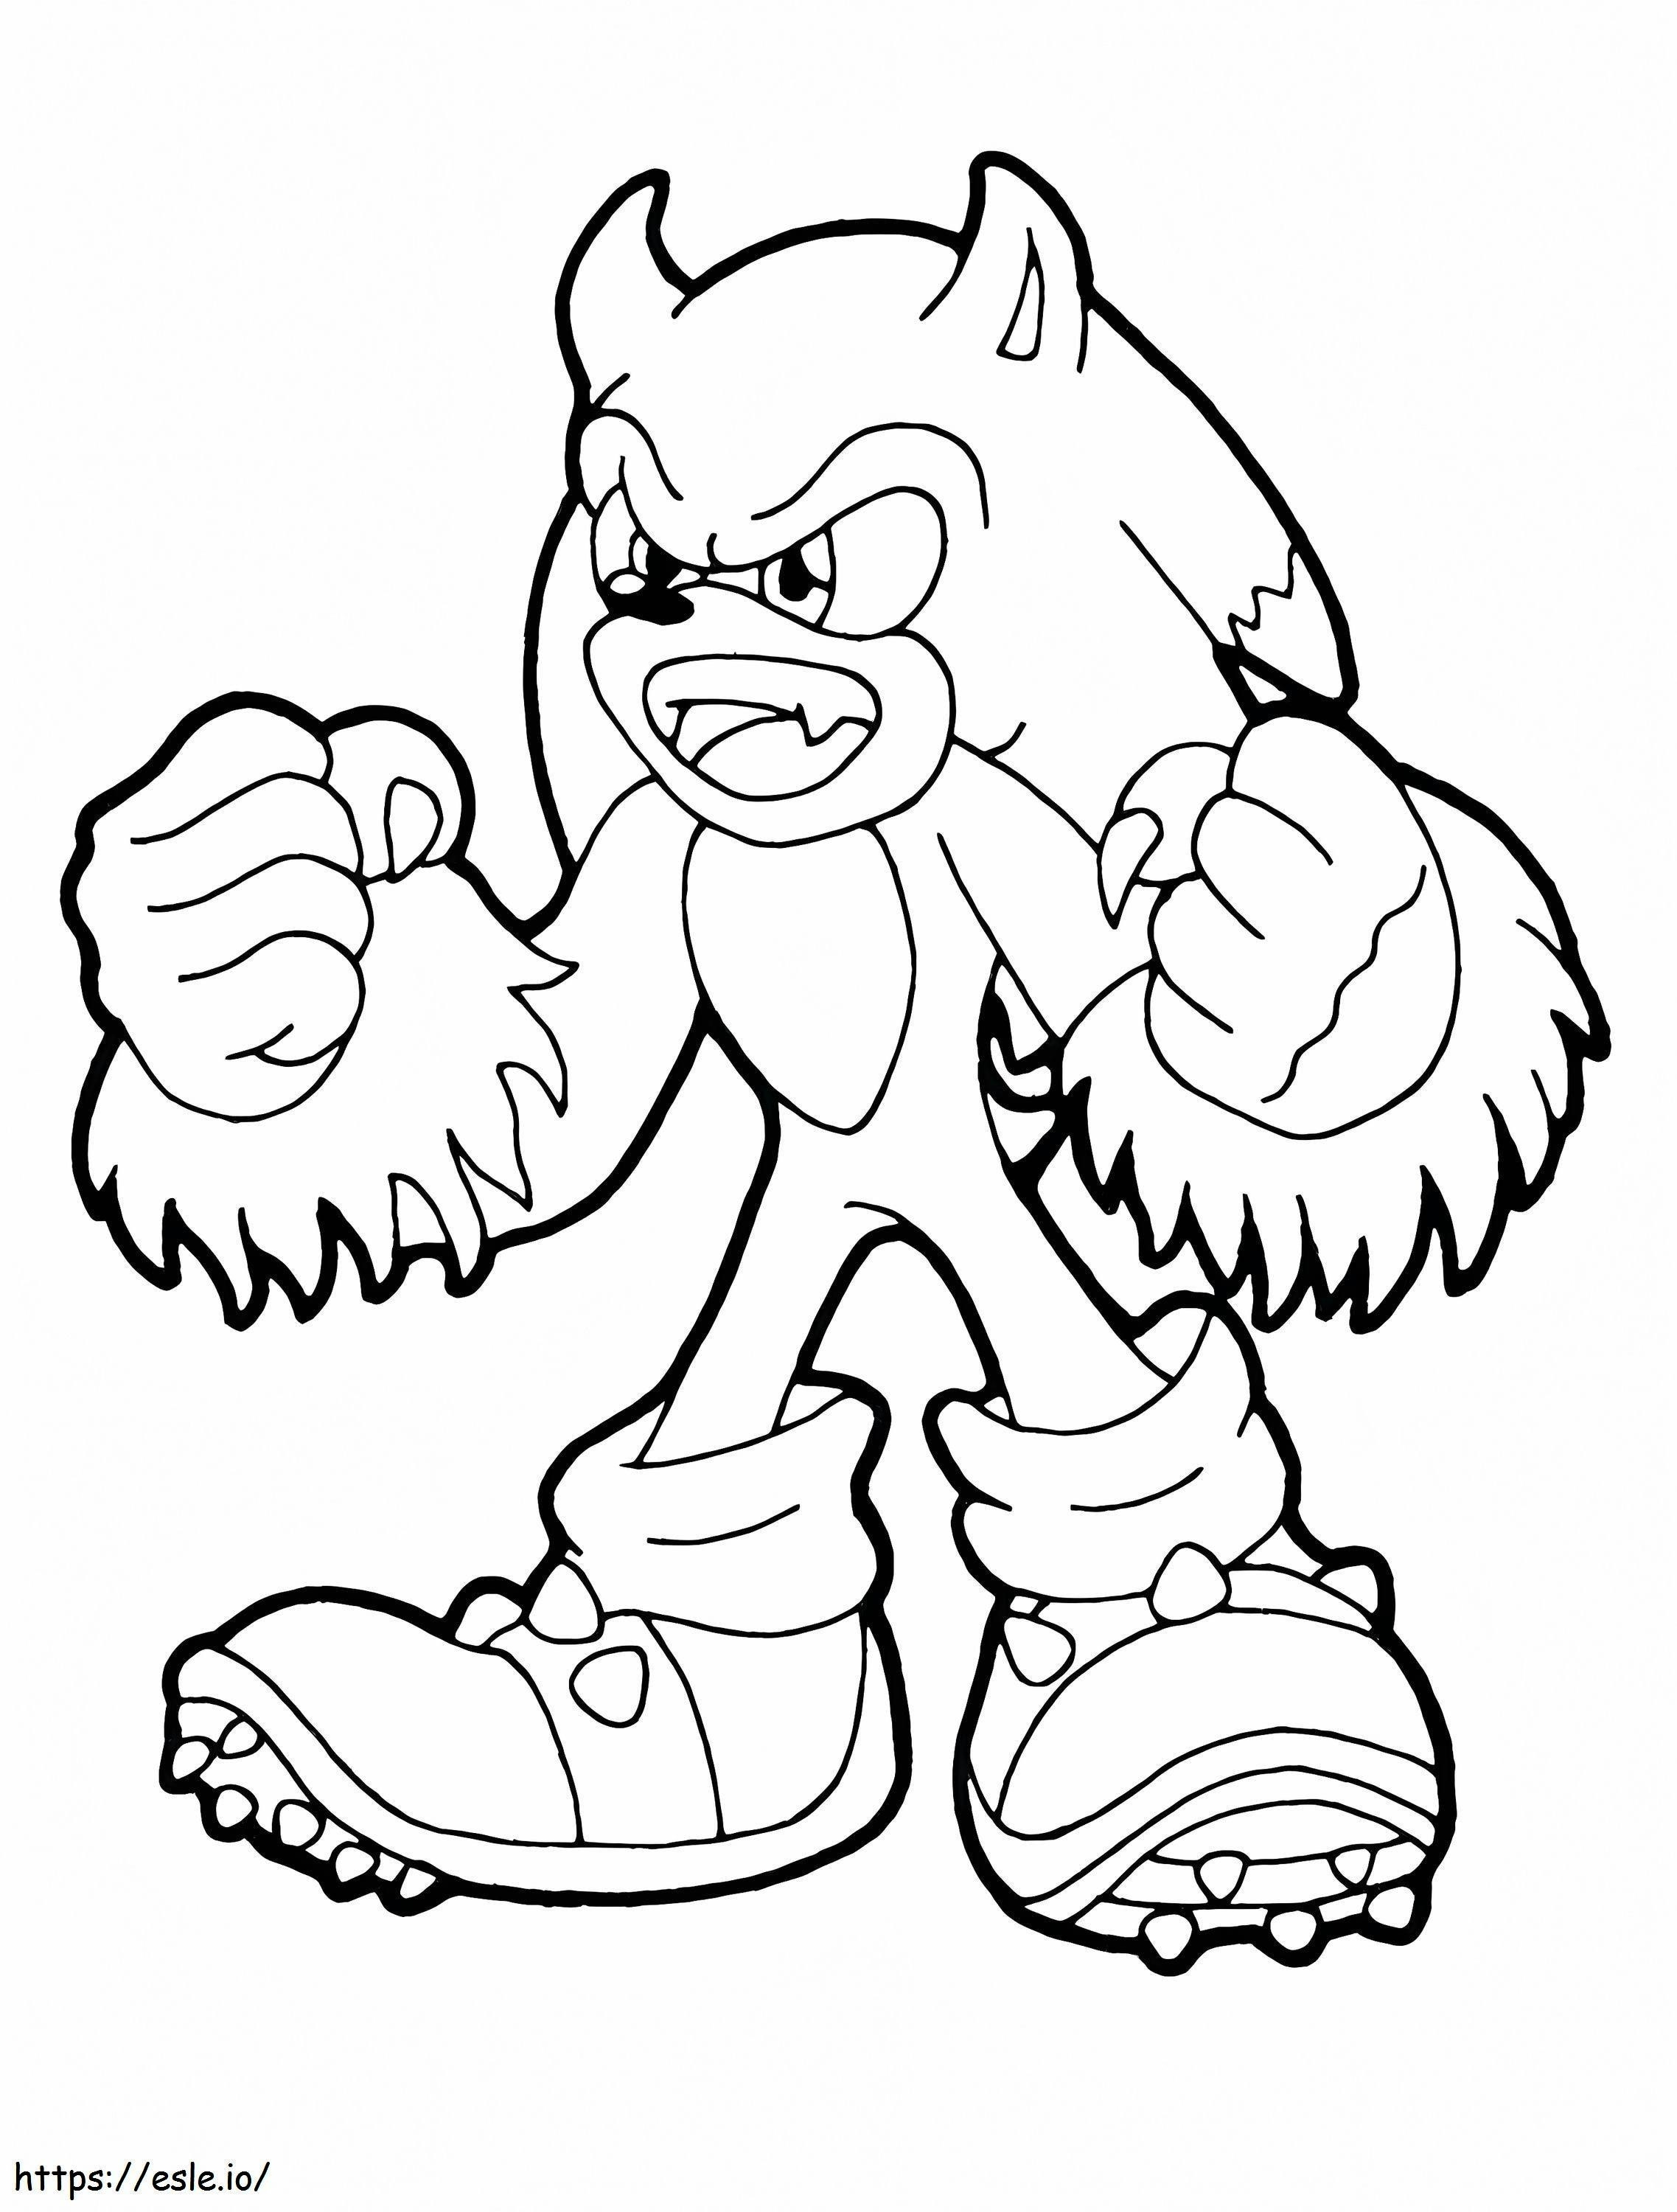 1573434490 Sonic Imprimible Sonic Knuckles Sonic Boom Sonic The Hedgehog Online para colorear